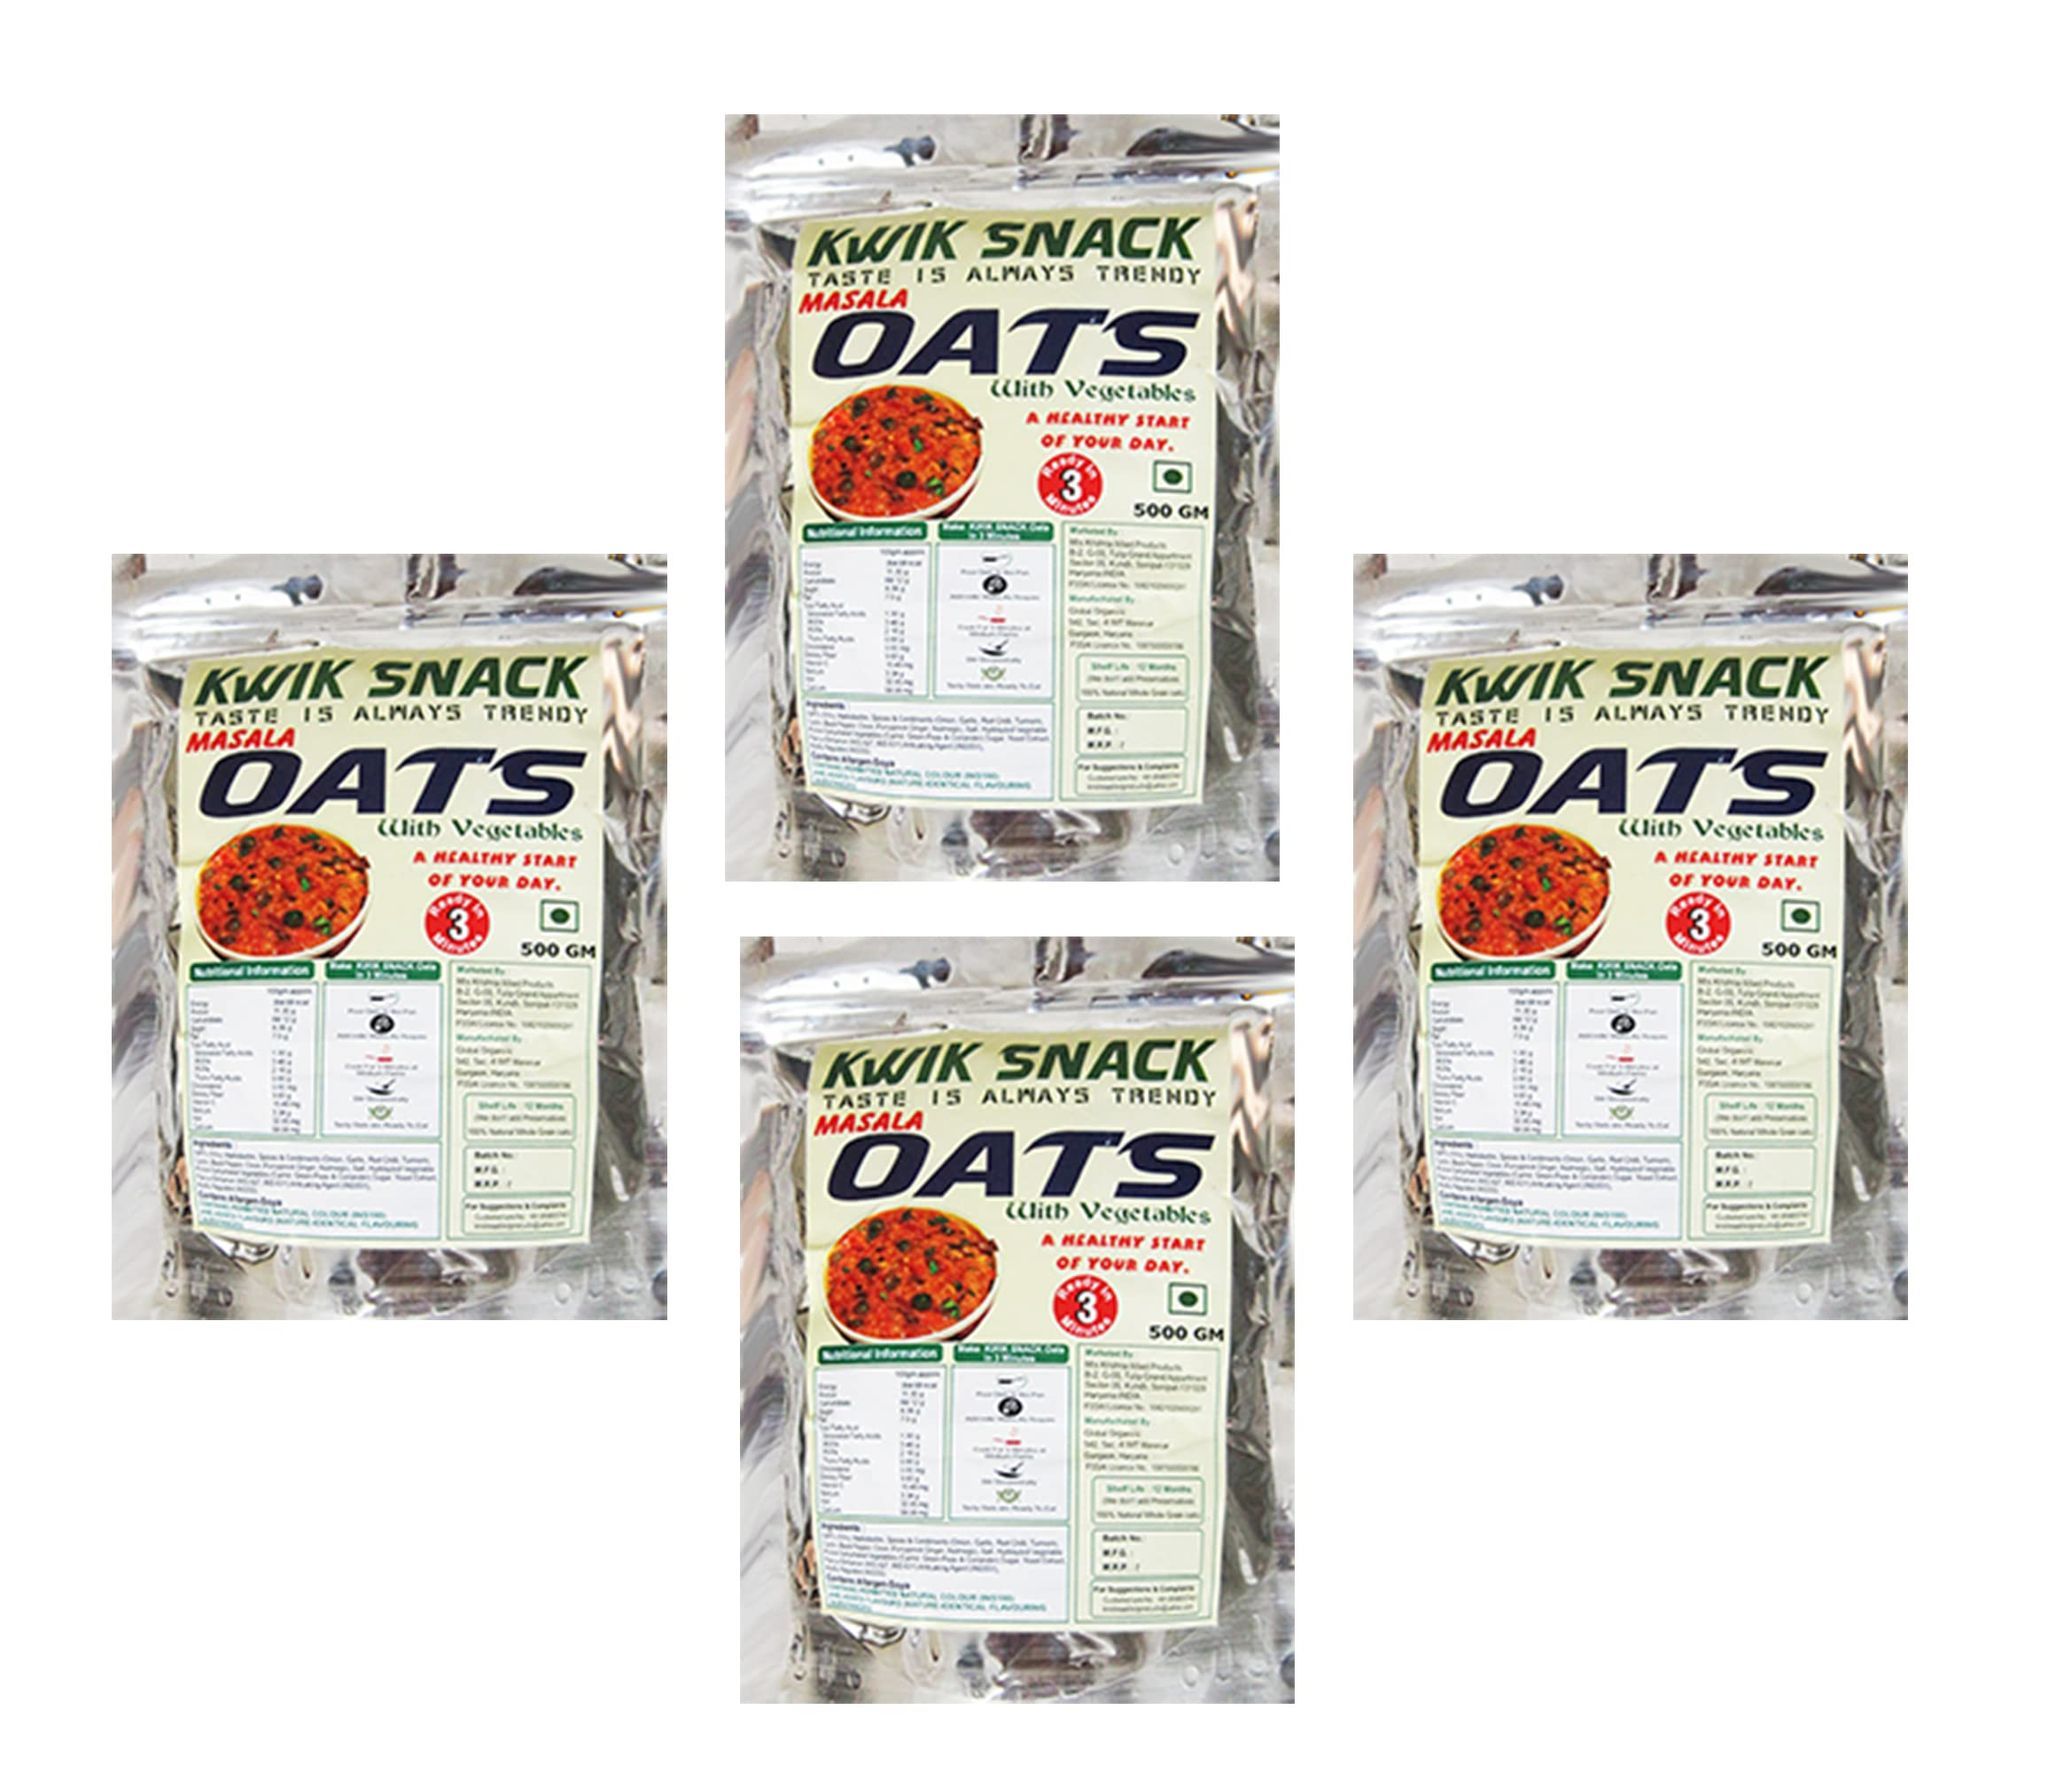 KWIK SNACK COMBO PACK OF 4 MASALA OATS OF (400 GM EACH) 4 X 400 GM = 1.6 KG - 100% Natural Whole Grain Oats, Good source of protein & Fiber, Gluten Free Oats, No Added Sugar, Healthy Breakfast Cereals,